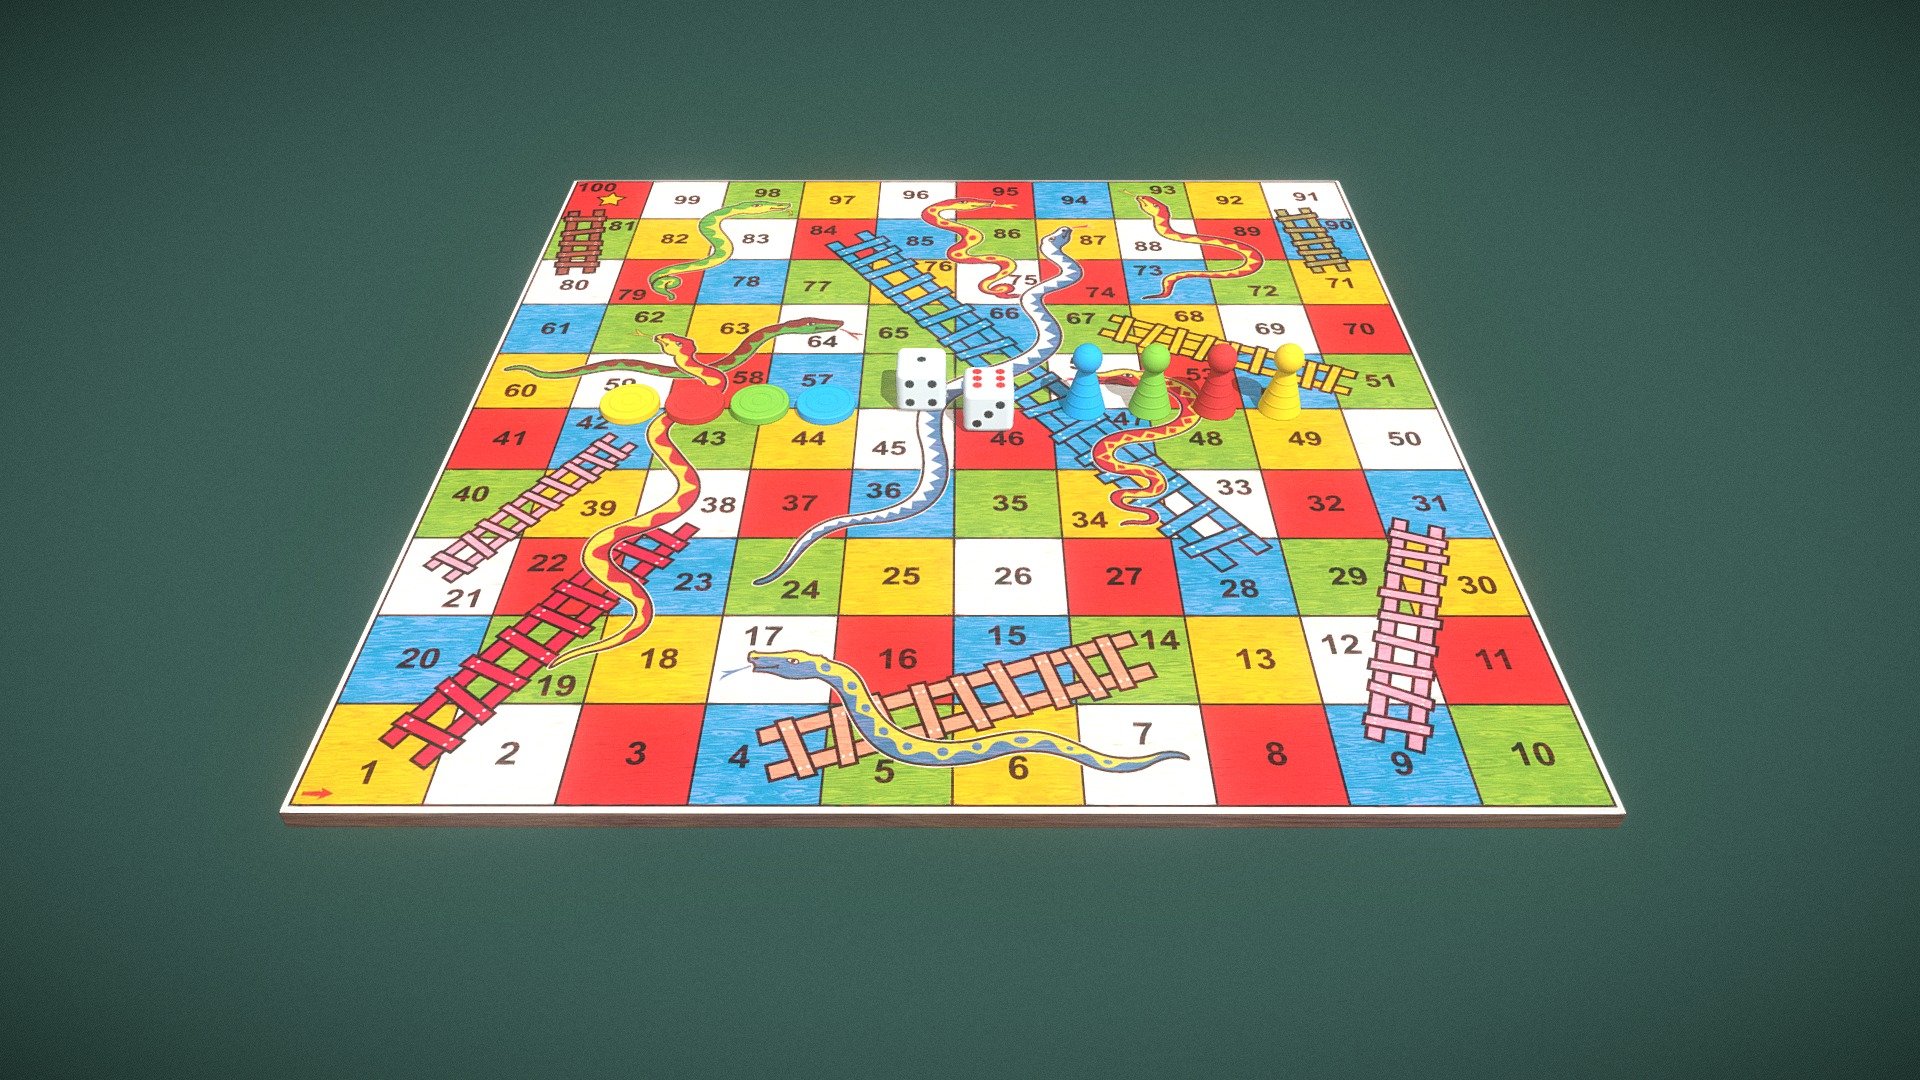 A simple and beautiful 3D model of Snakes and Ladders board game which is one of the most played board games alongside ludo.

Separate models for Board, Dice and Pieces(Coin &amp; Pawn) are provided. Board is made of wood. Use the set for decoration, gameplay, or any other way you like in your virtual environment. All textures are very high quality with 2K resolution. All polygons are quads and tris and no N-Gons are used in geometry during production.



Key Features:




Minimum possible poly-counts

Separate model for Board, Dice and Pieces

Single Mesh &amp; Material for each model

2 Types of Pieces - Coin &amp; Pawn

Real-world scale

No N-Gons

Non-overlapping Unwrapped UVs

High quality 2K resolution textures



Model Information :




Vertices (Board, Dice, Coin, Pawn): 1,592 (172, 296, 386, 738)

Triangles (Board, Dice, Coin, Pawn): 3,168 (340, 588, 768, 1472)

UV Mapped: Yes(Non-Overlapping)



Textures :




BaseColor

AO

Metallic

Roughness

MetallicSmoothness

Normal
 - Snakes and Ladders - Buy Royalty Free 3D model by Game Art Universe (@gameartuniverse) 3d model